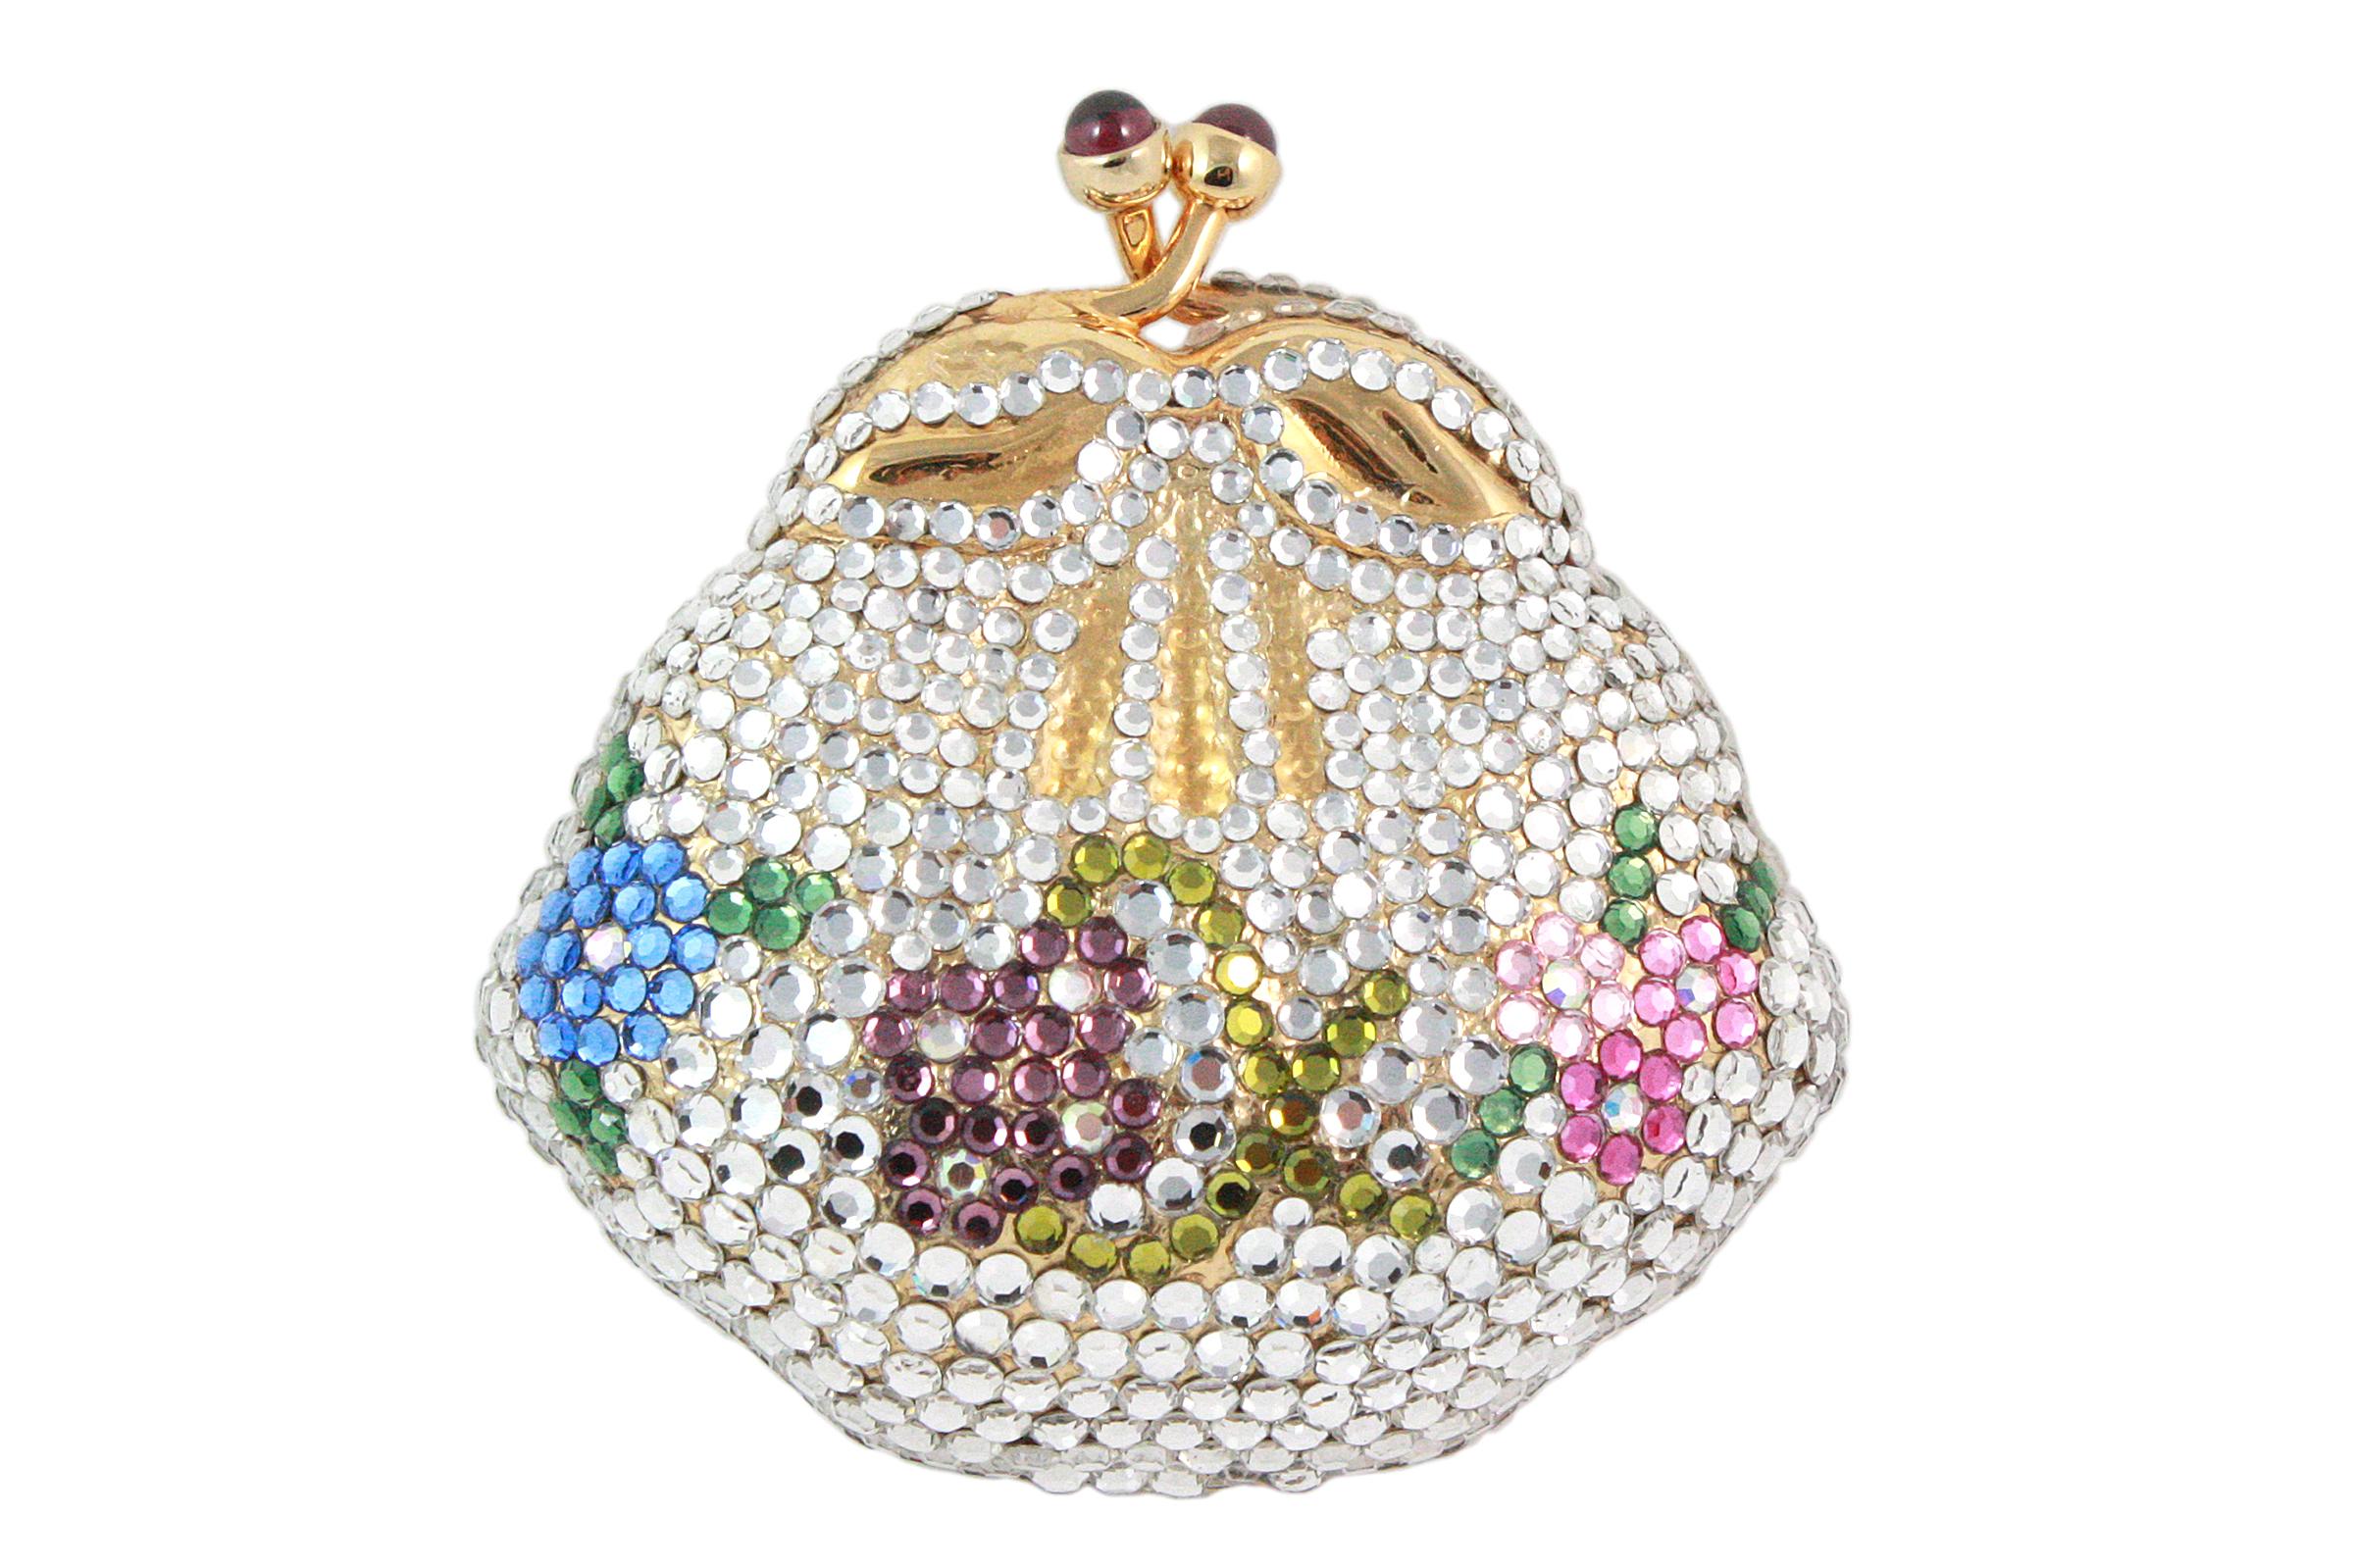 Judith Leiber coin purse
Multi-colored rhinestones in a floral design 
Gold with purple gem snap closure 
Goldtone interior 
Comes with blue dust-bag 